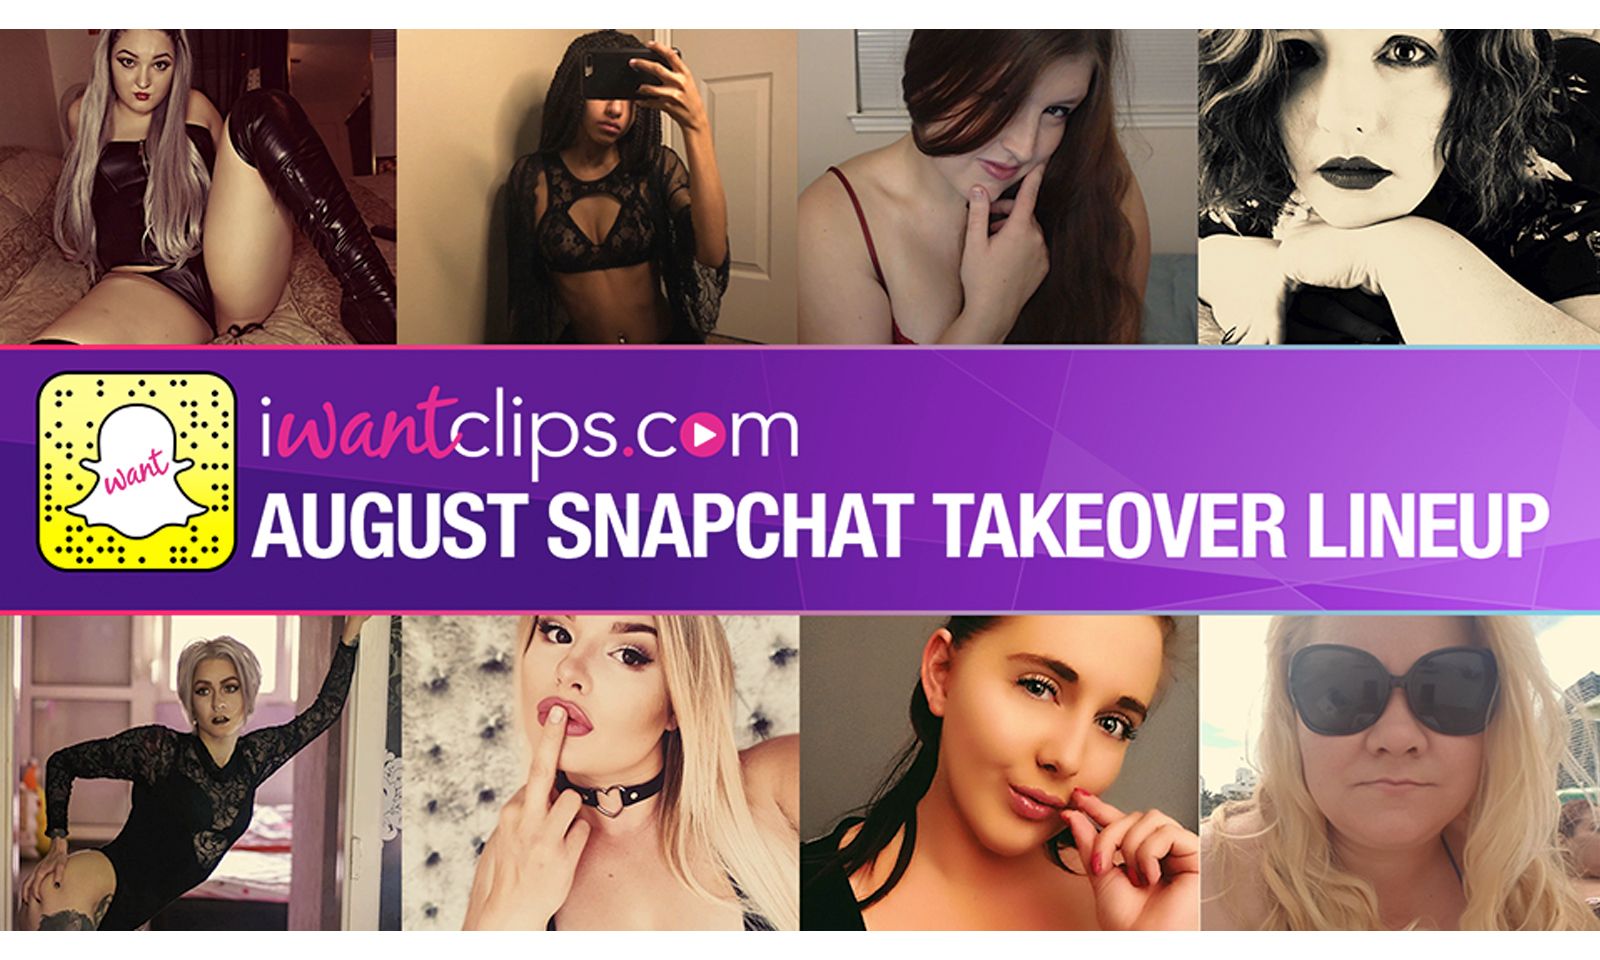 iWantClips’ Artists Ready To Take Over Snapchat in August